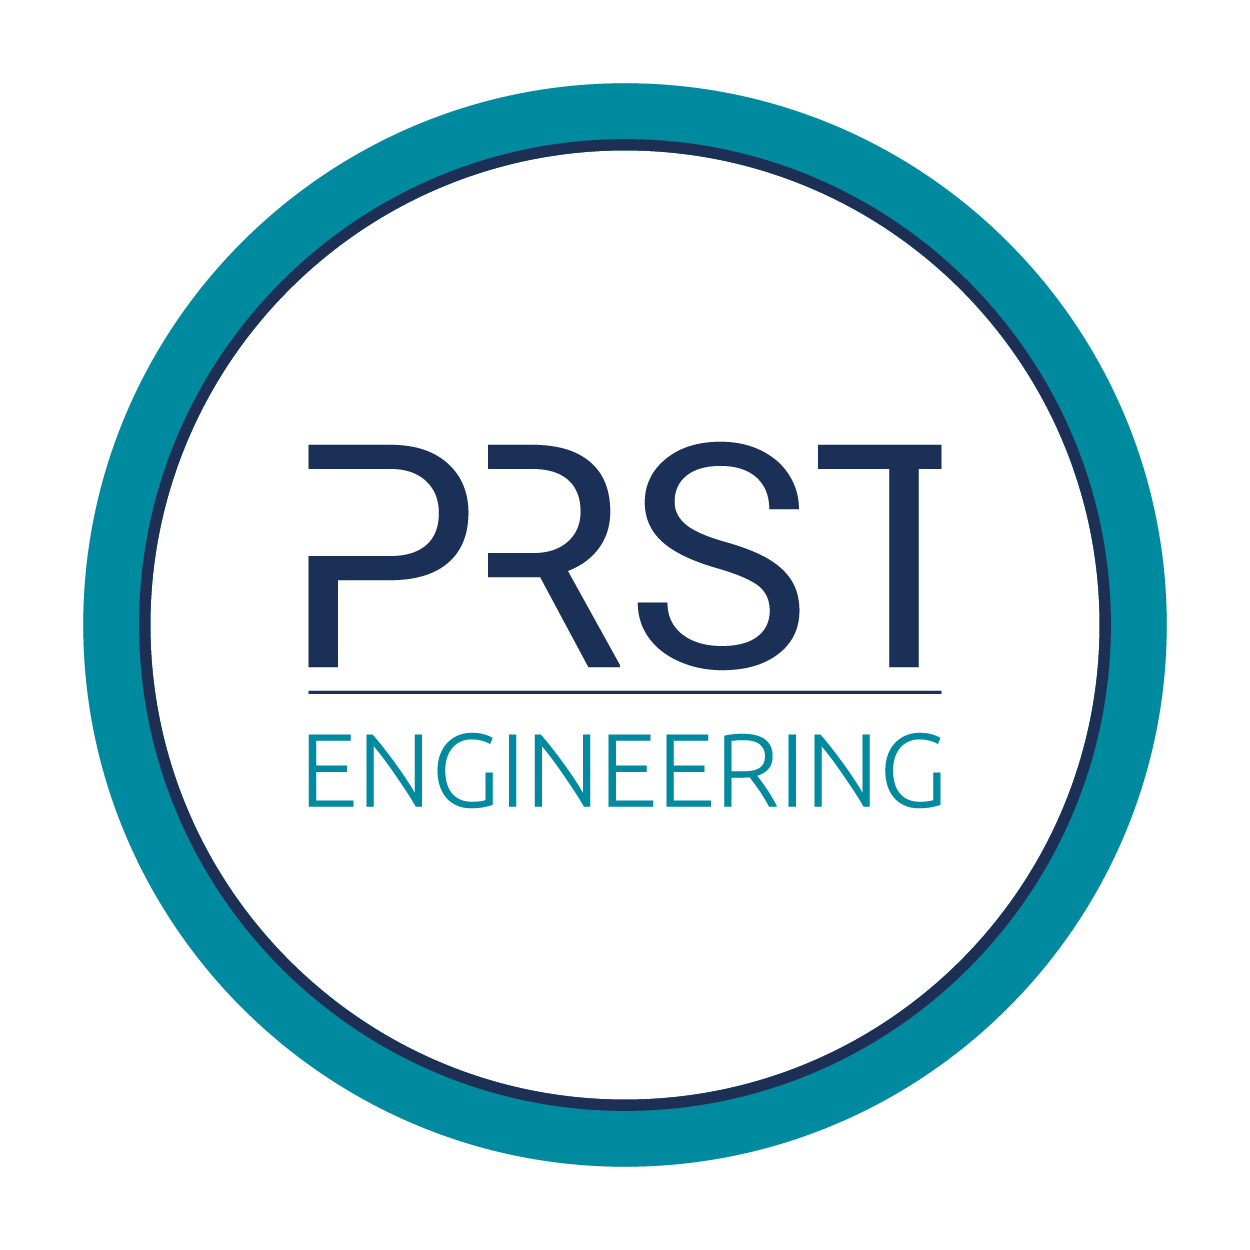 logo of PRST Engineering , subsidiary of the PRST group in the south of France